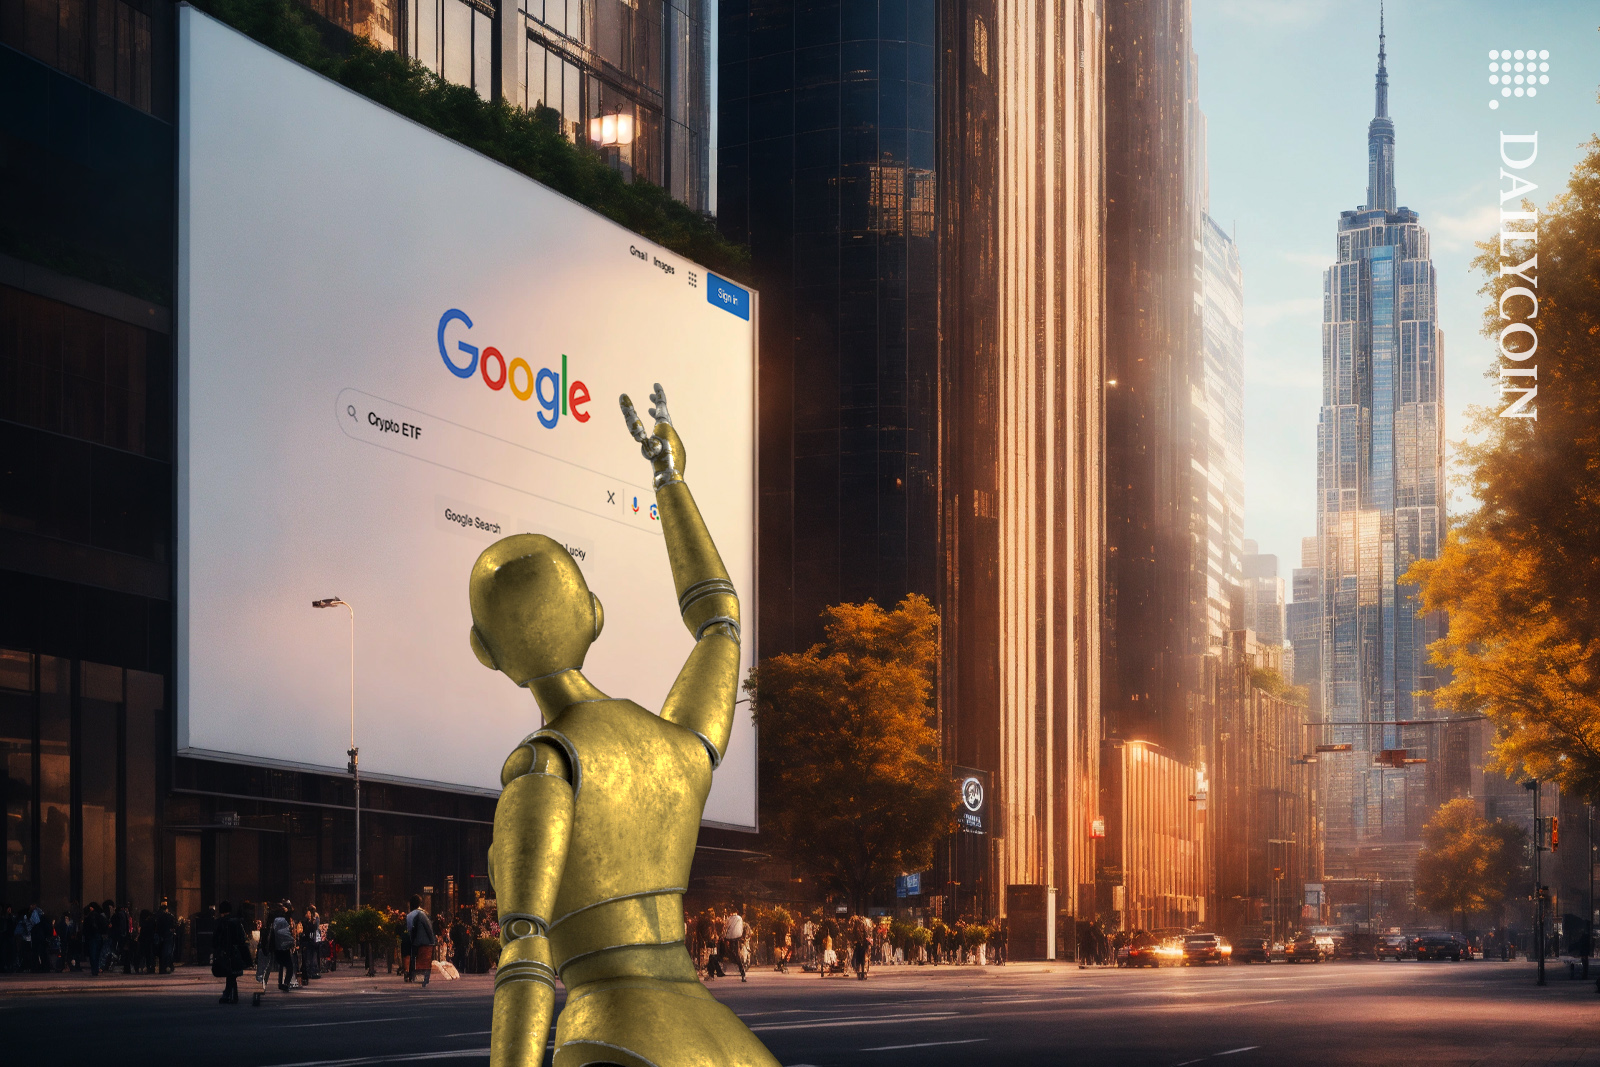 Robot happy to see ETF on a google billboard advertisement.